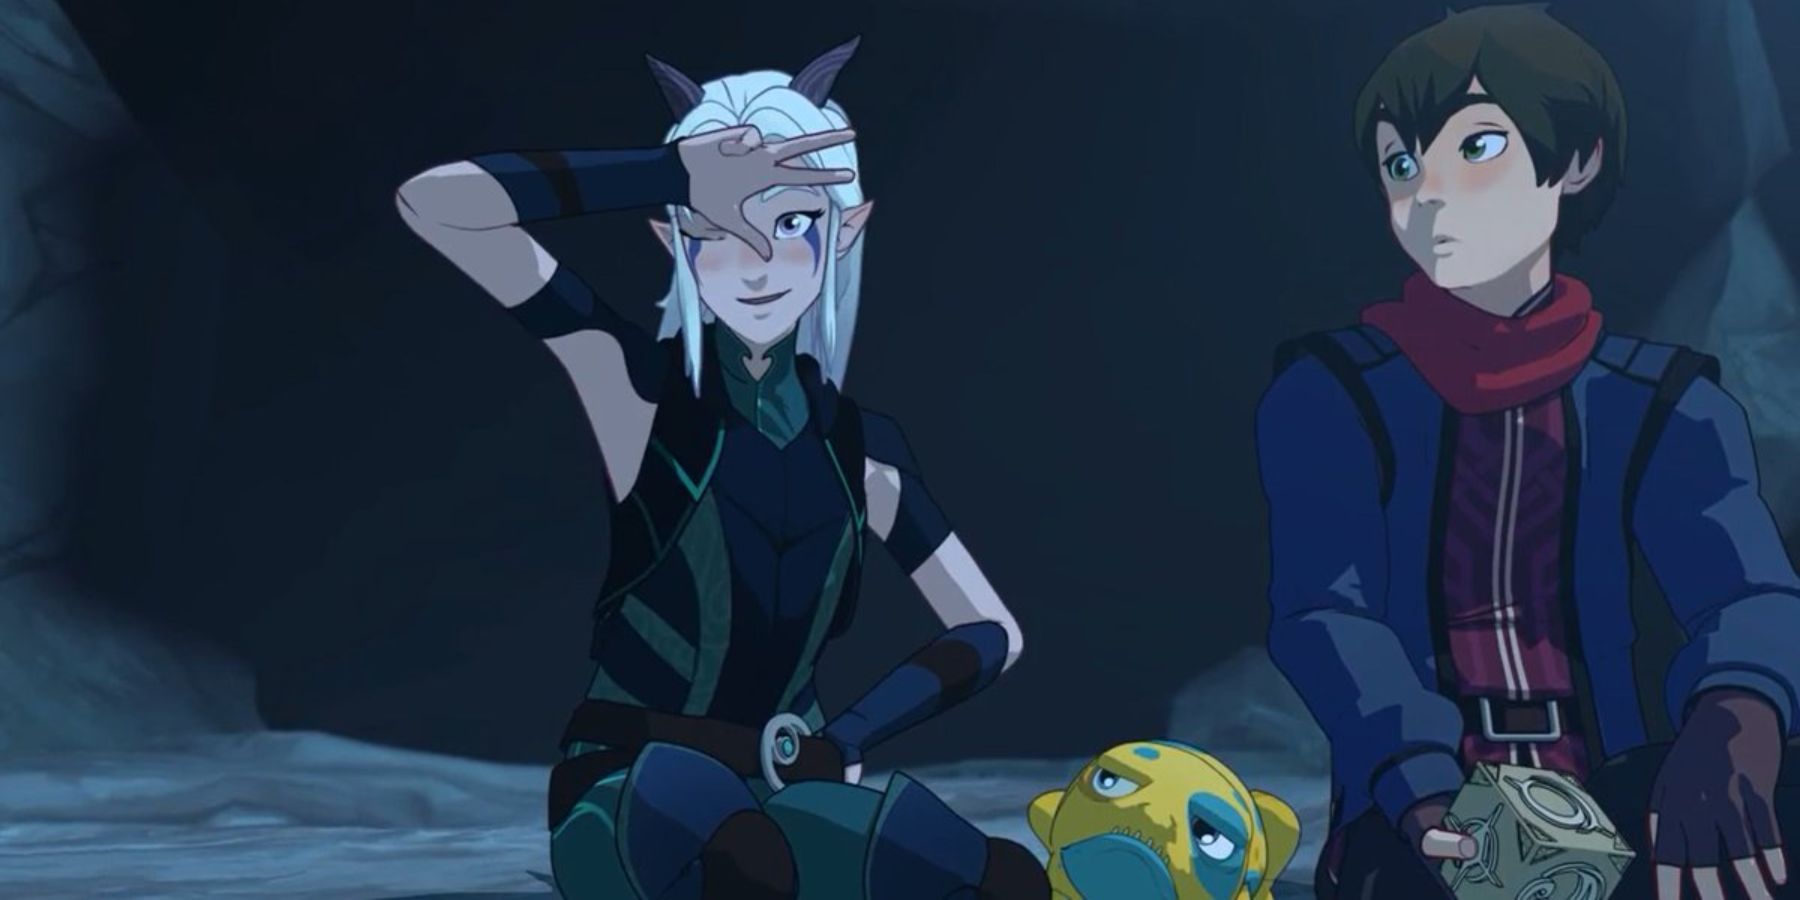 Rayla explaining how her Moonshadow Powers work in The Dragon Prince